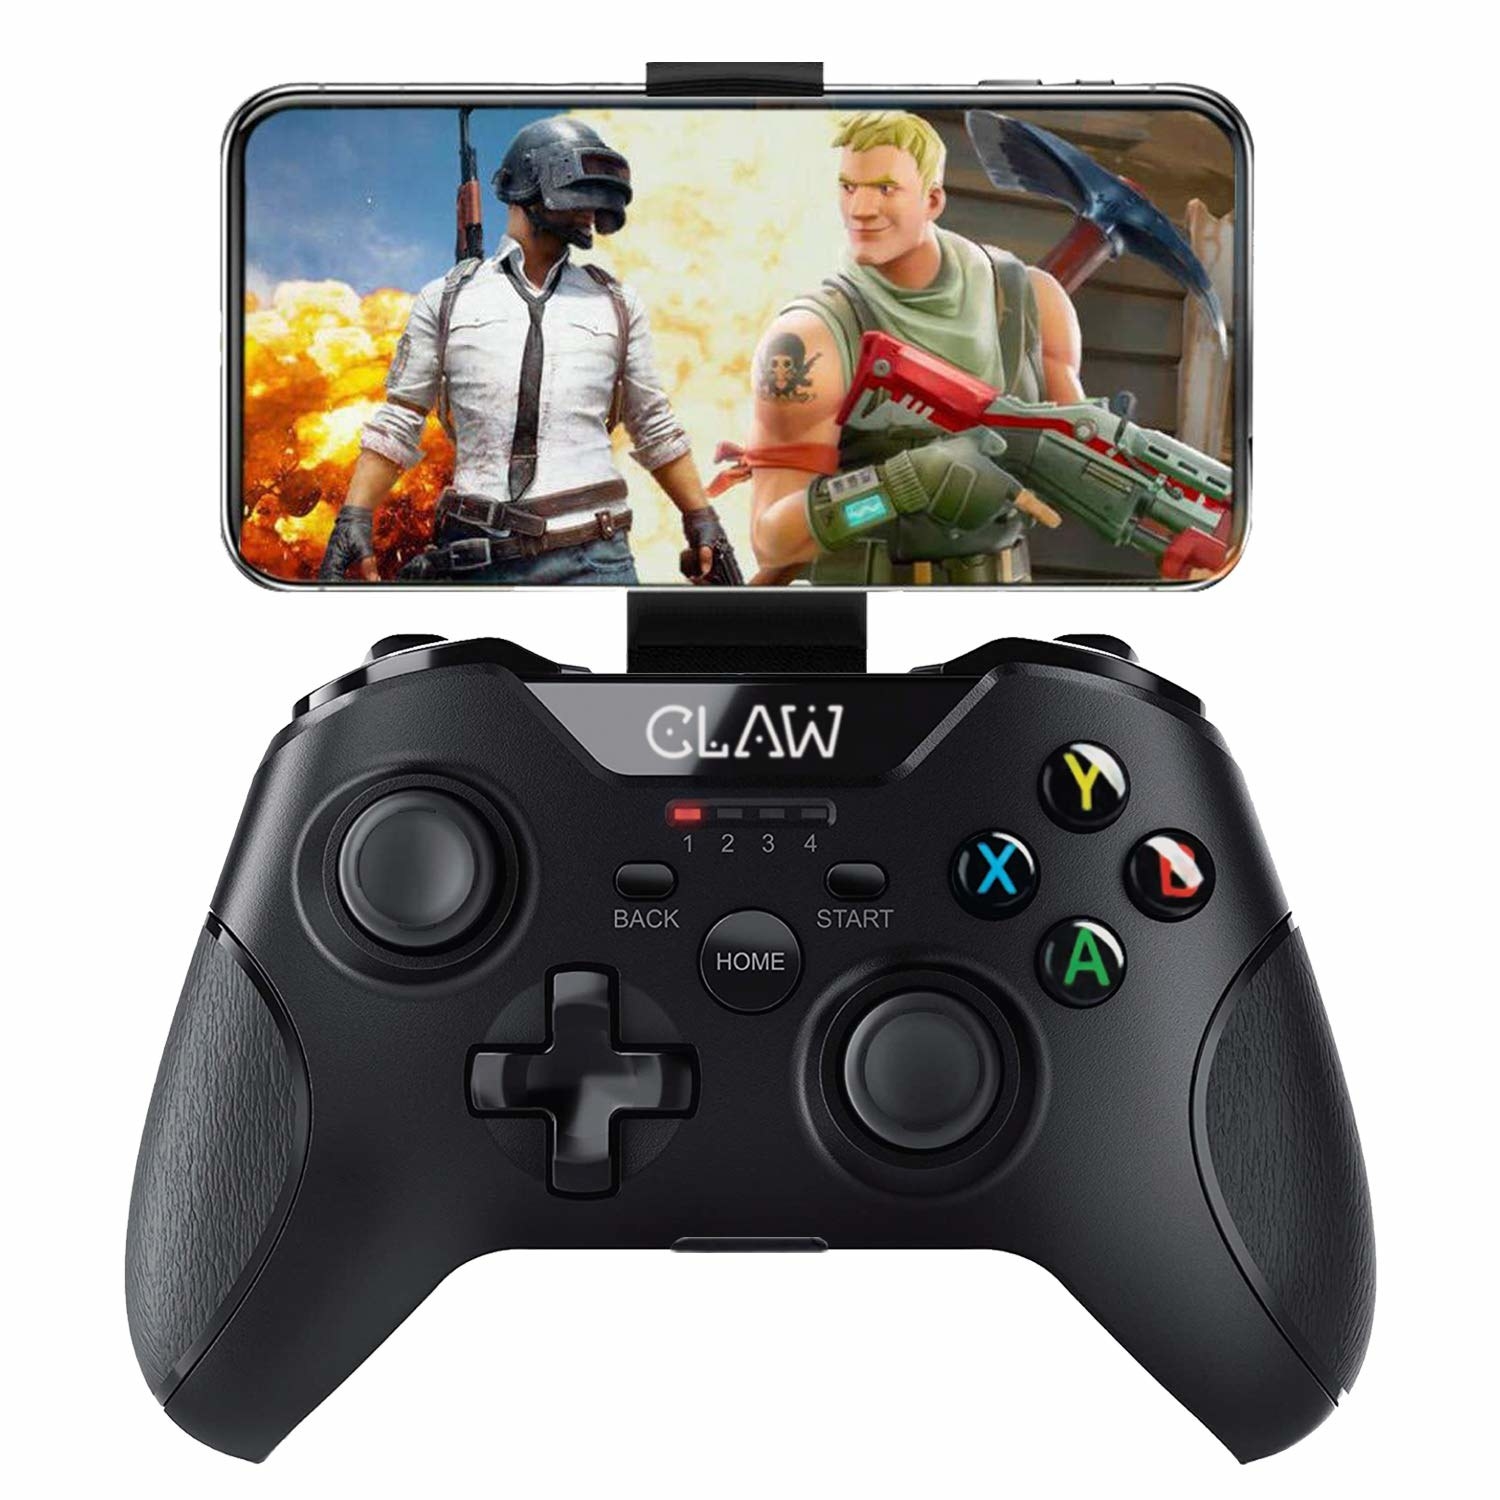 A CLAW Gamepad Controller in black with a phone attached to it.